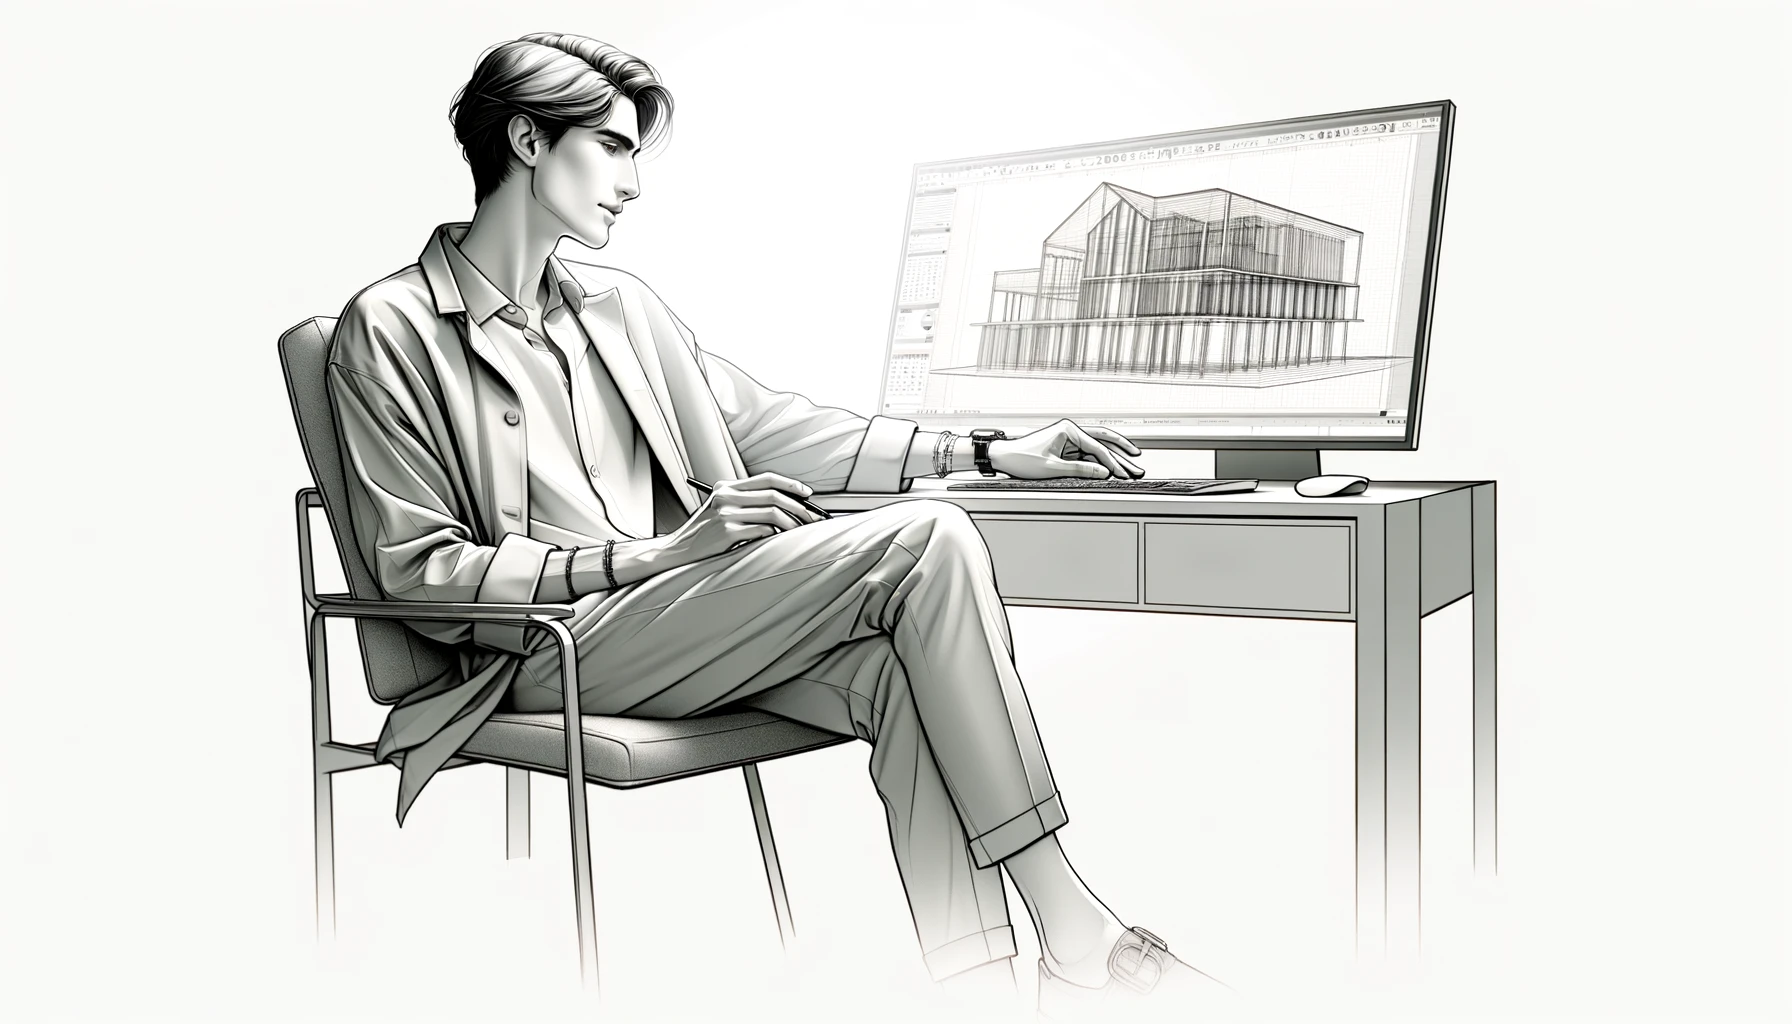 Man sitting at desk looking at BIM content model on a computer screen